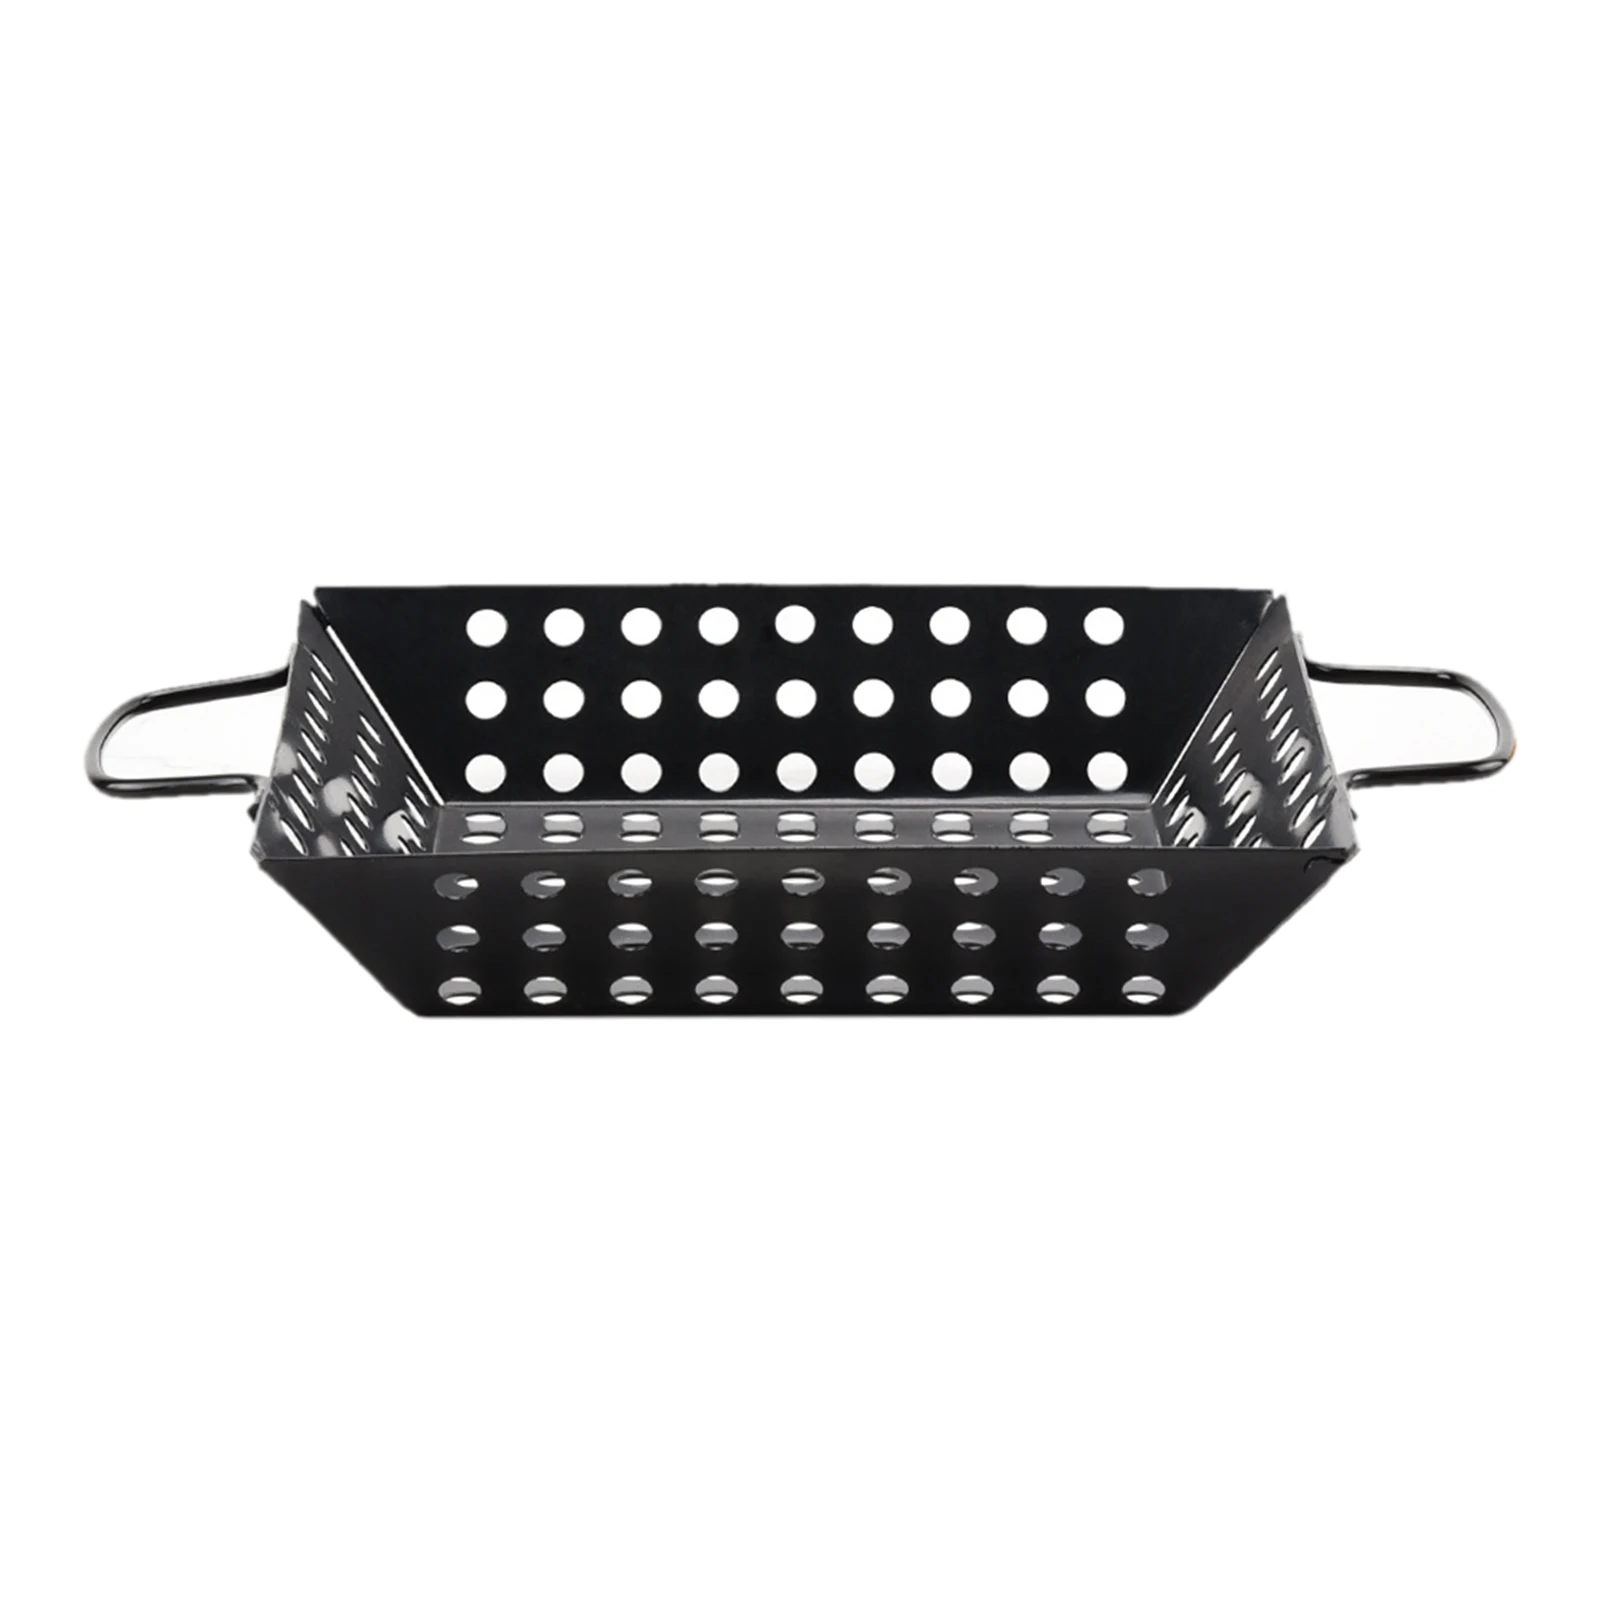 Grill Pan Carbon Steel Barbecue Grill Plate Food Basket Tray Grilling Wok